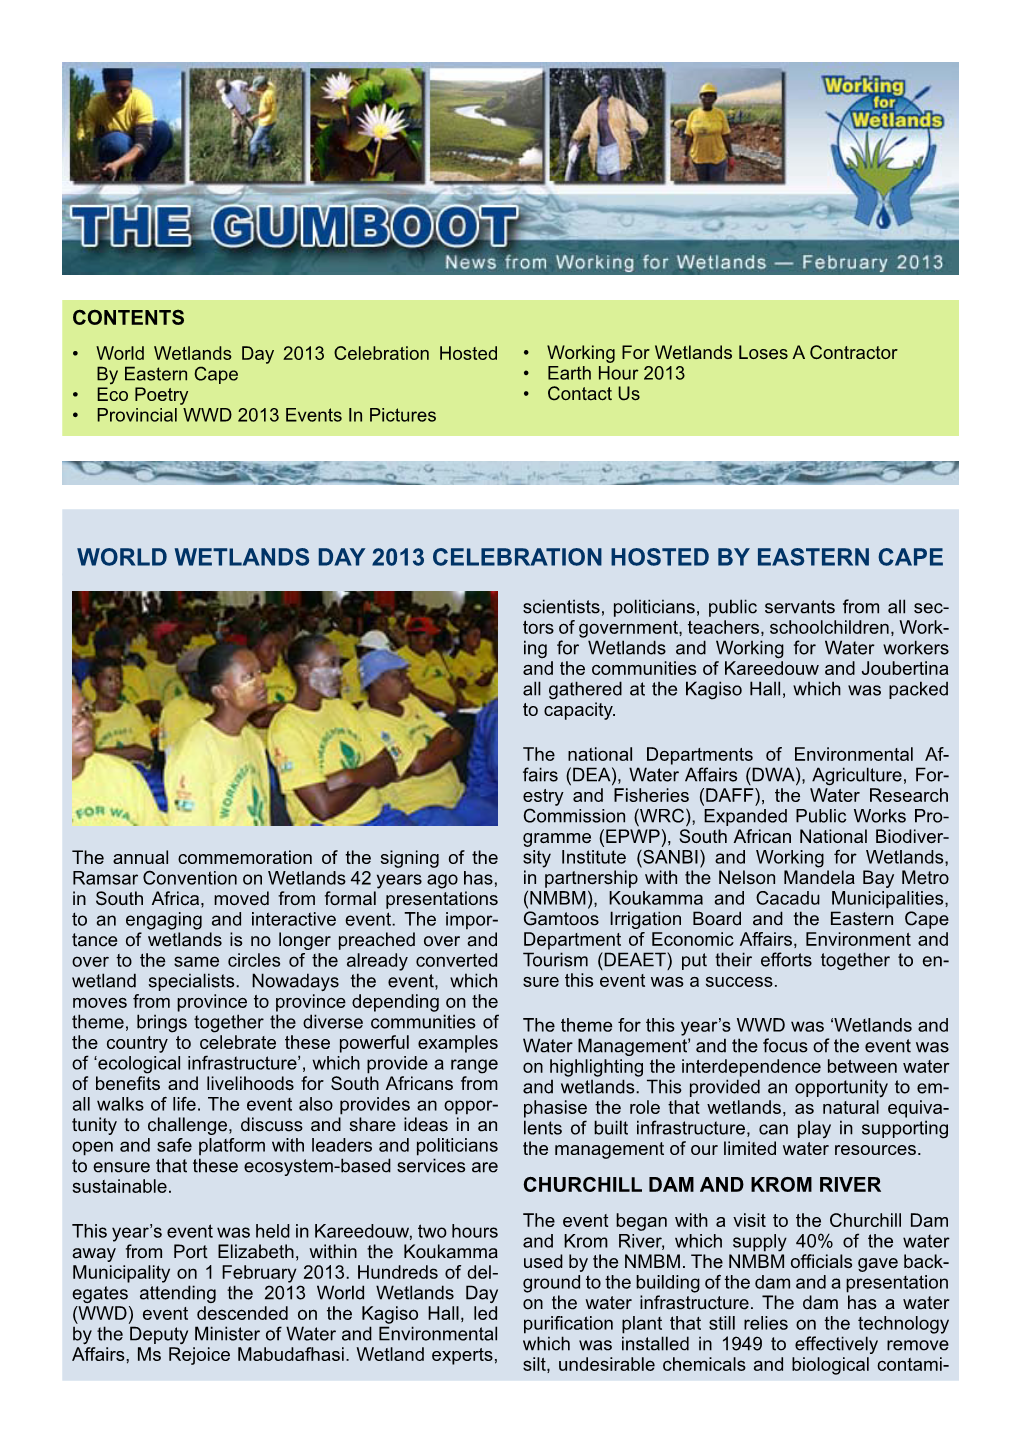 World Wetlands Day 2013 Celebration Hosted by Eastern Cape